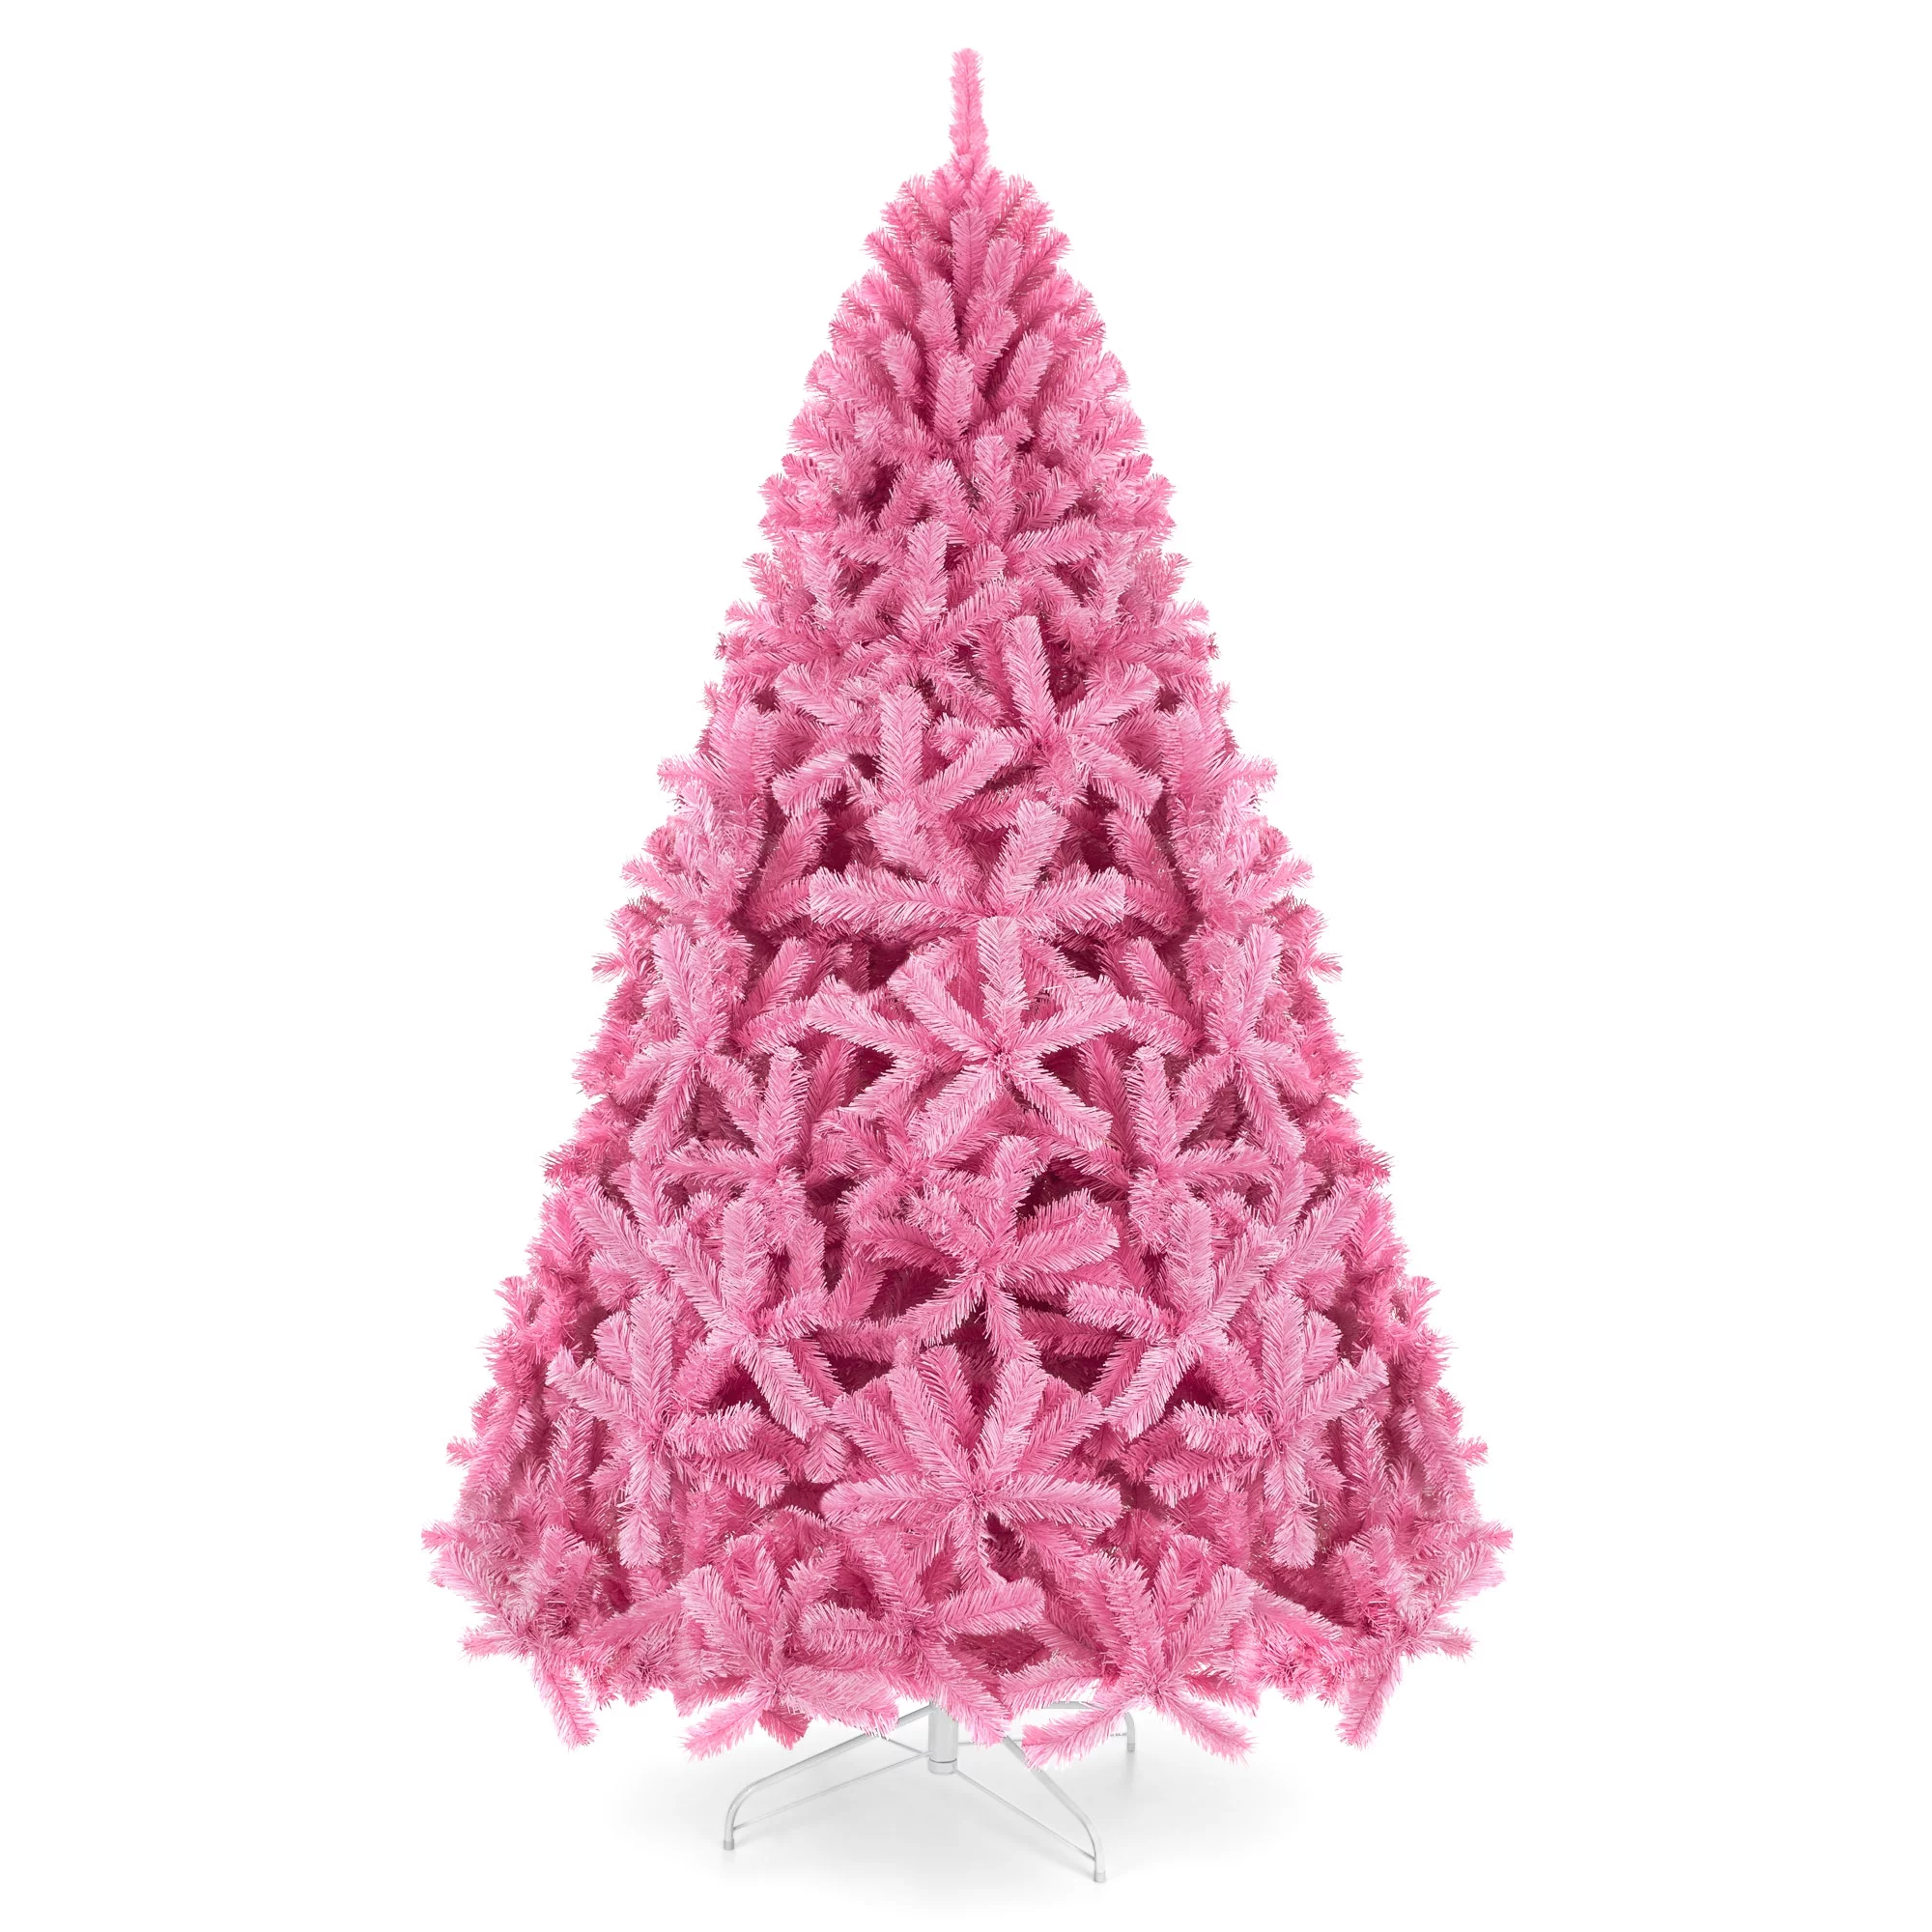 Best Choice Products 6ft Artificial Pink Christmas Full Tree Festive Holiday Decoration w/ 947 Branch Tips, Stand